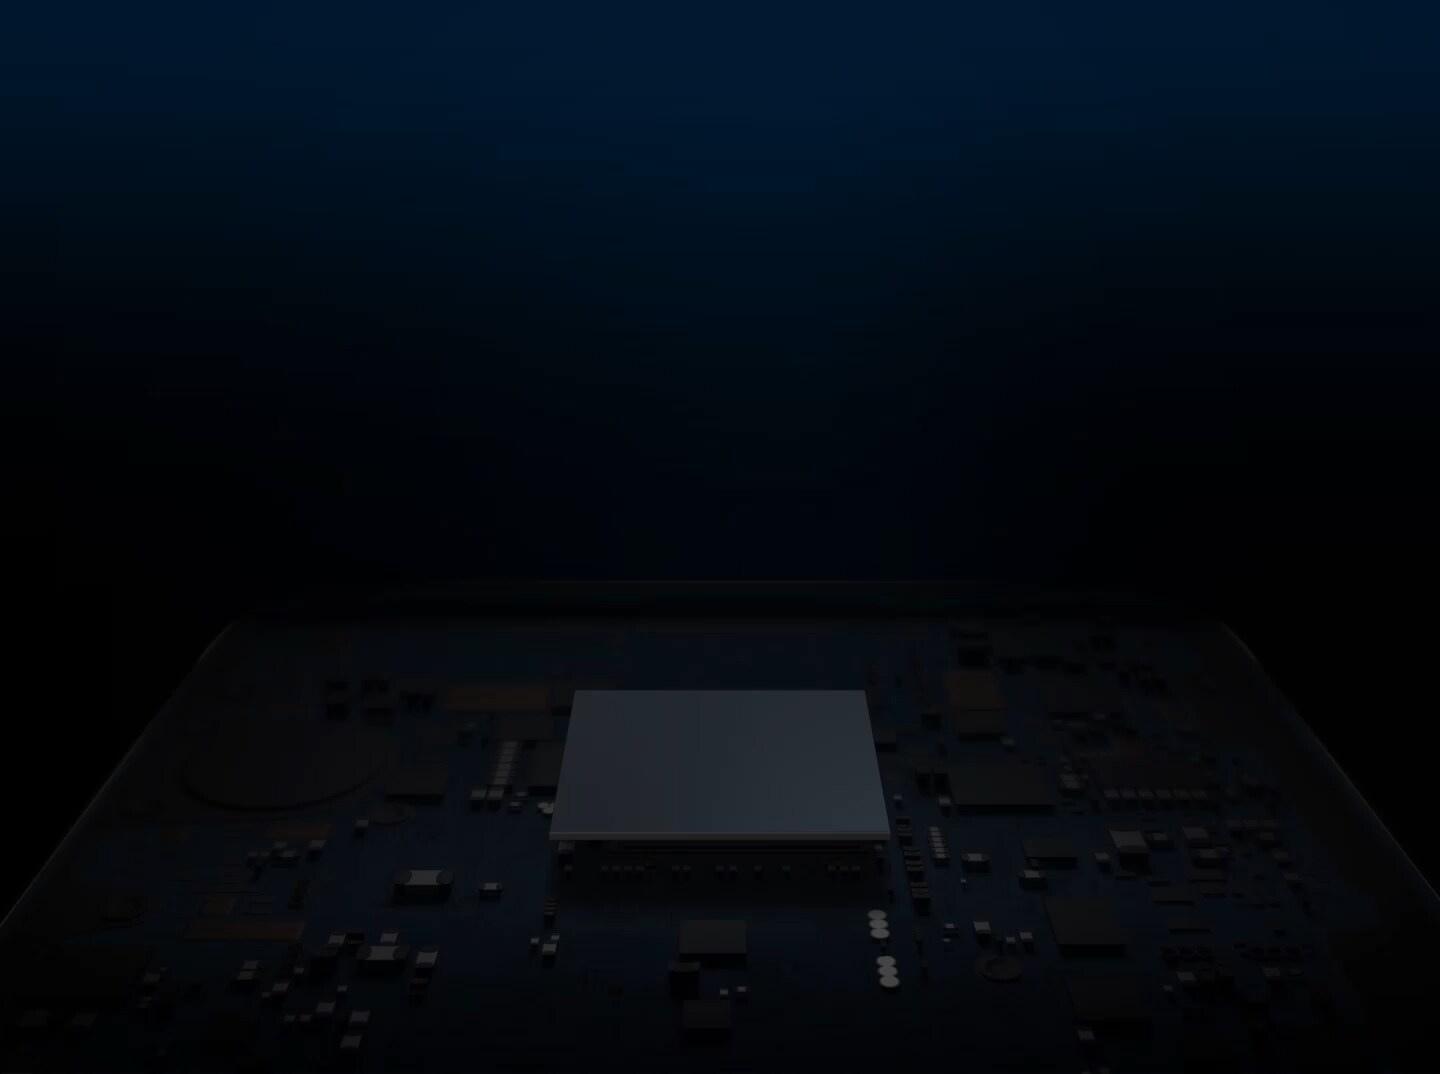 The beam of light falls down on Exynos 9825 and the light wave spreads from processors đồ sộ điện thoại thông minh hardware.